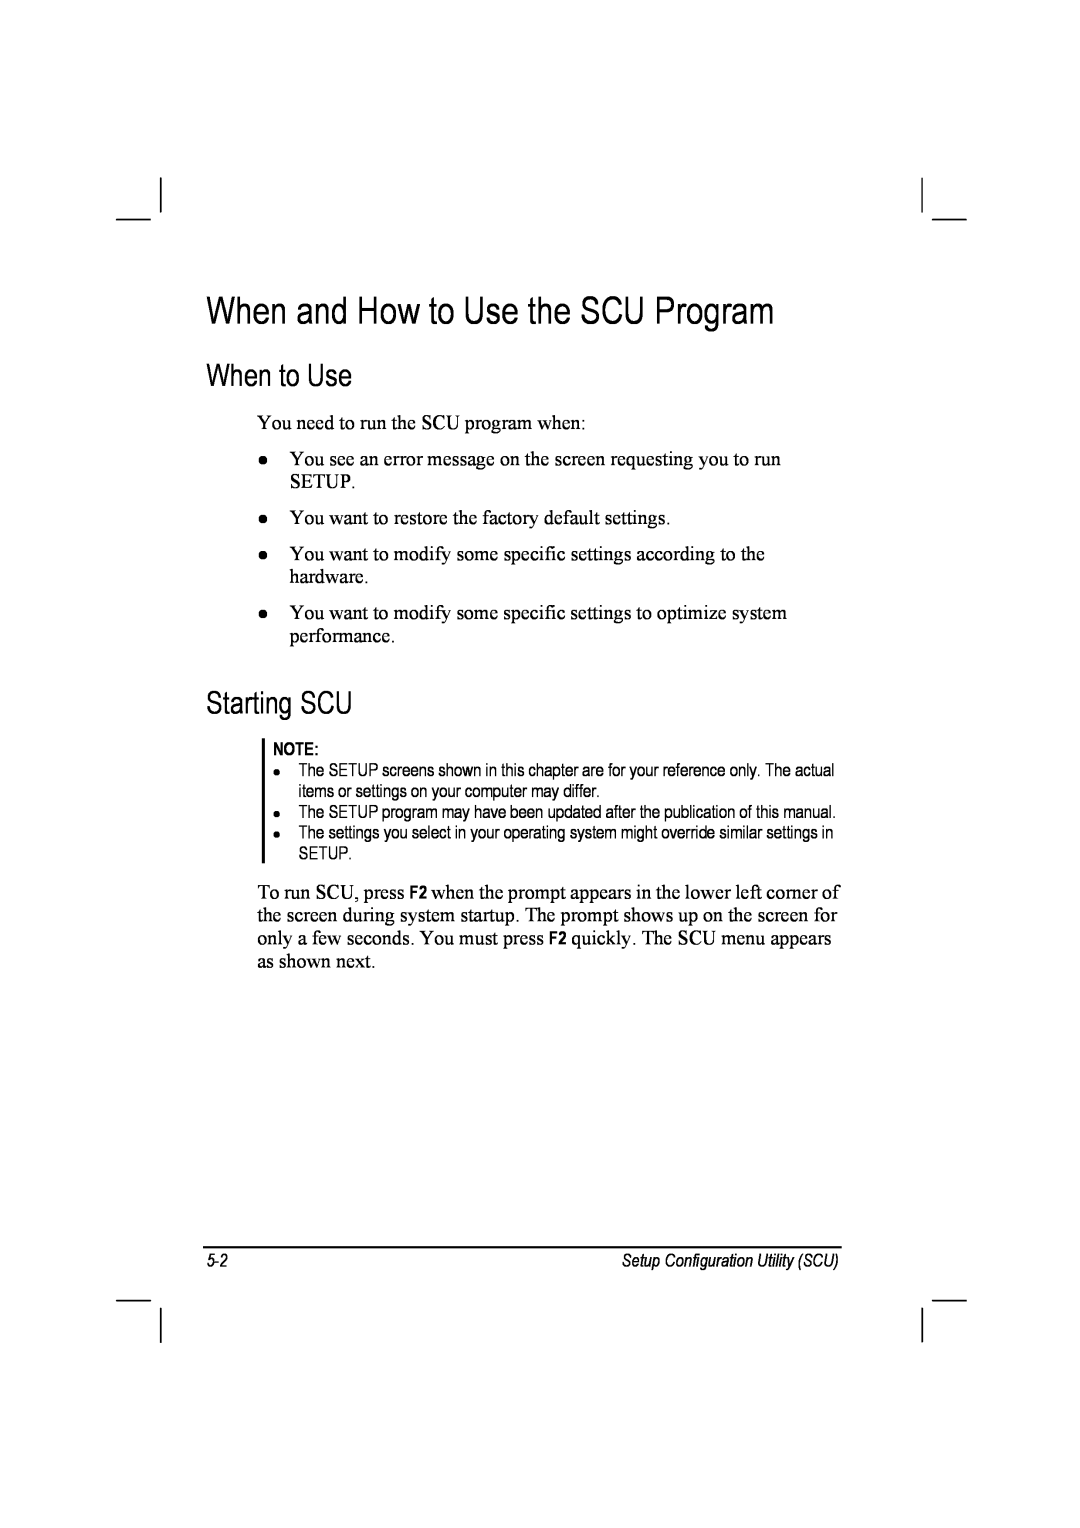 TAG 10 manual When and How to Use the SCU Program, When to Use, Starting SCU 